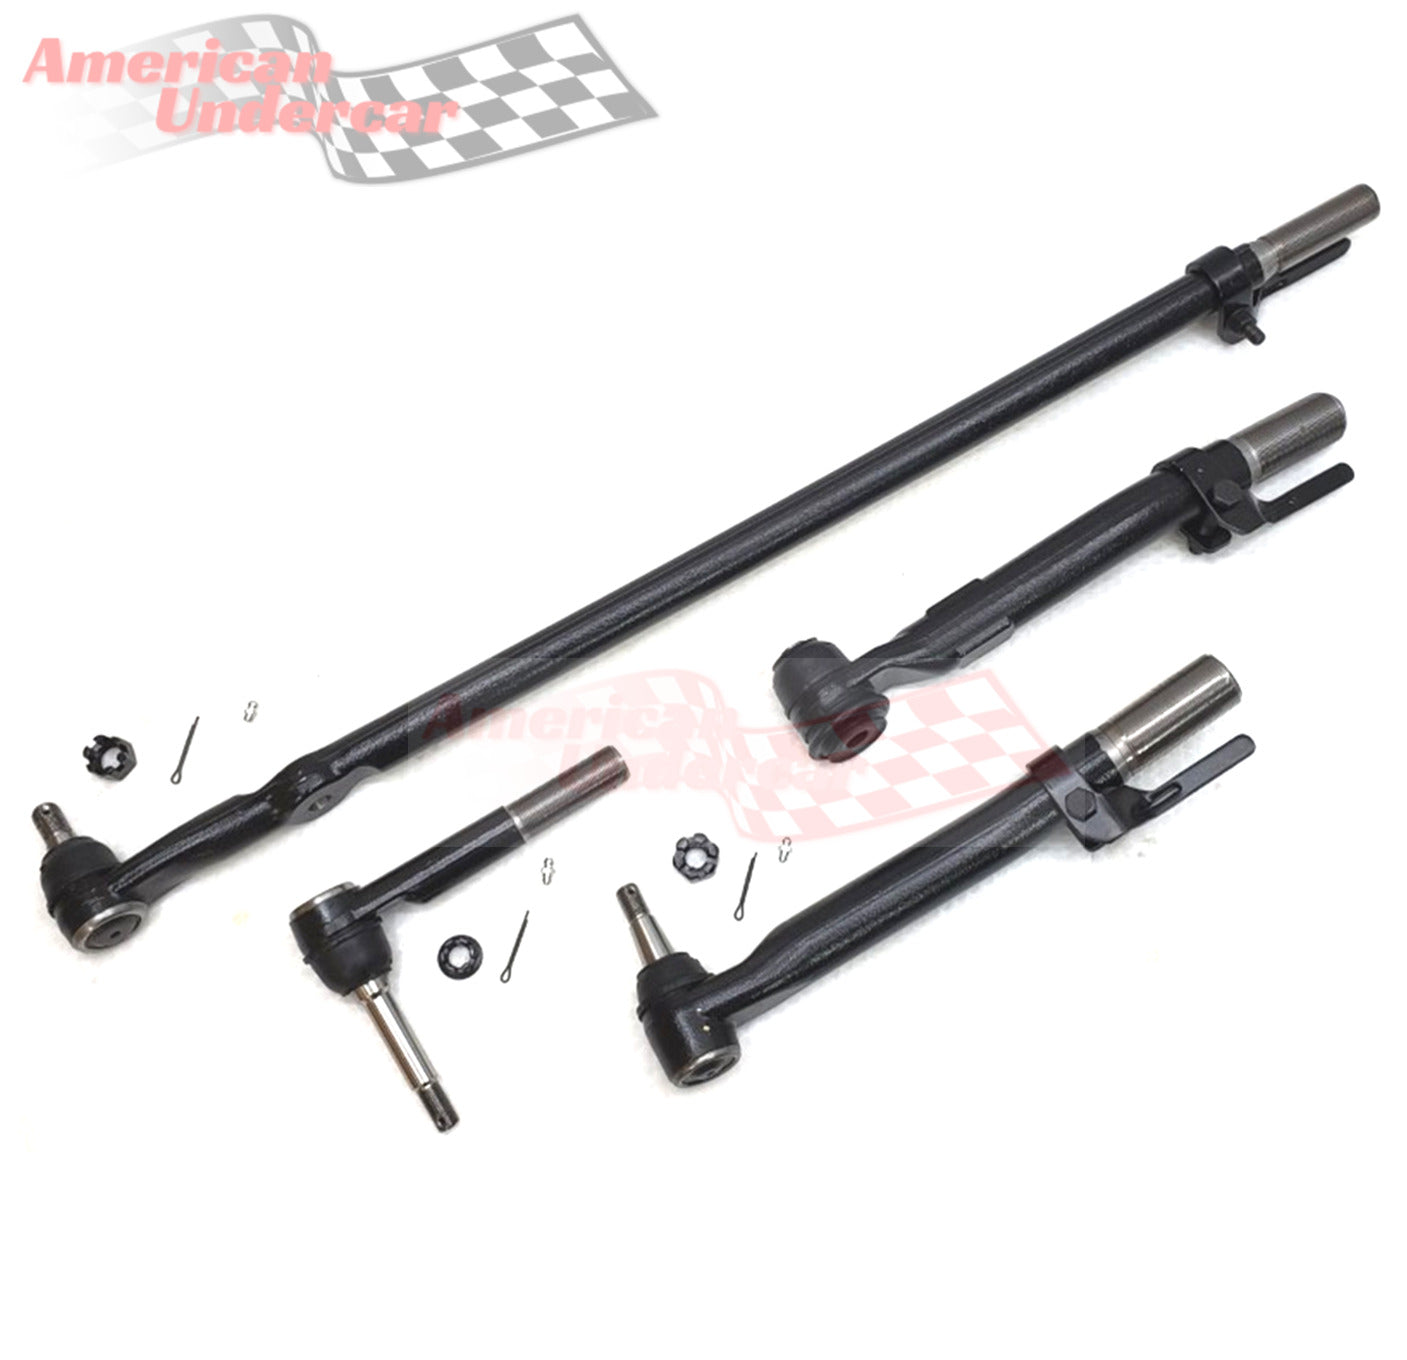 XRF Ford F350 Super Duty Tie Rod Steering and Suspension Kit 2005 - 2010 4x4